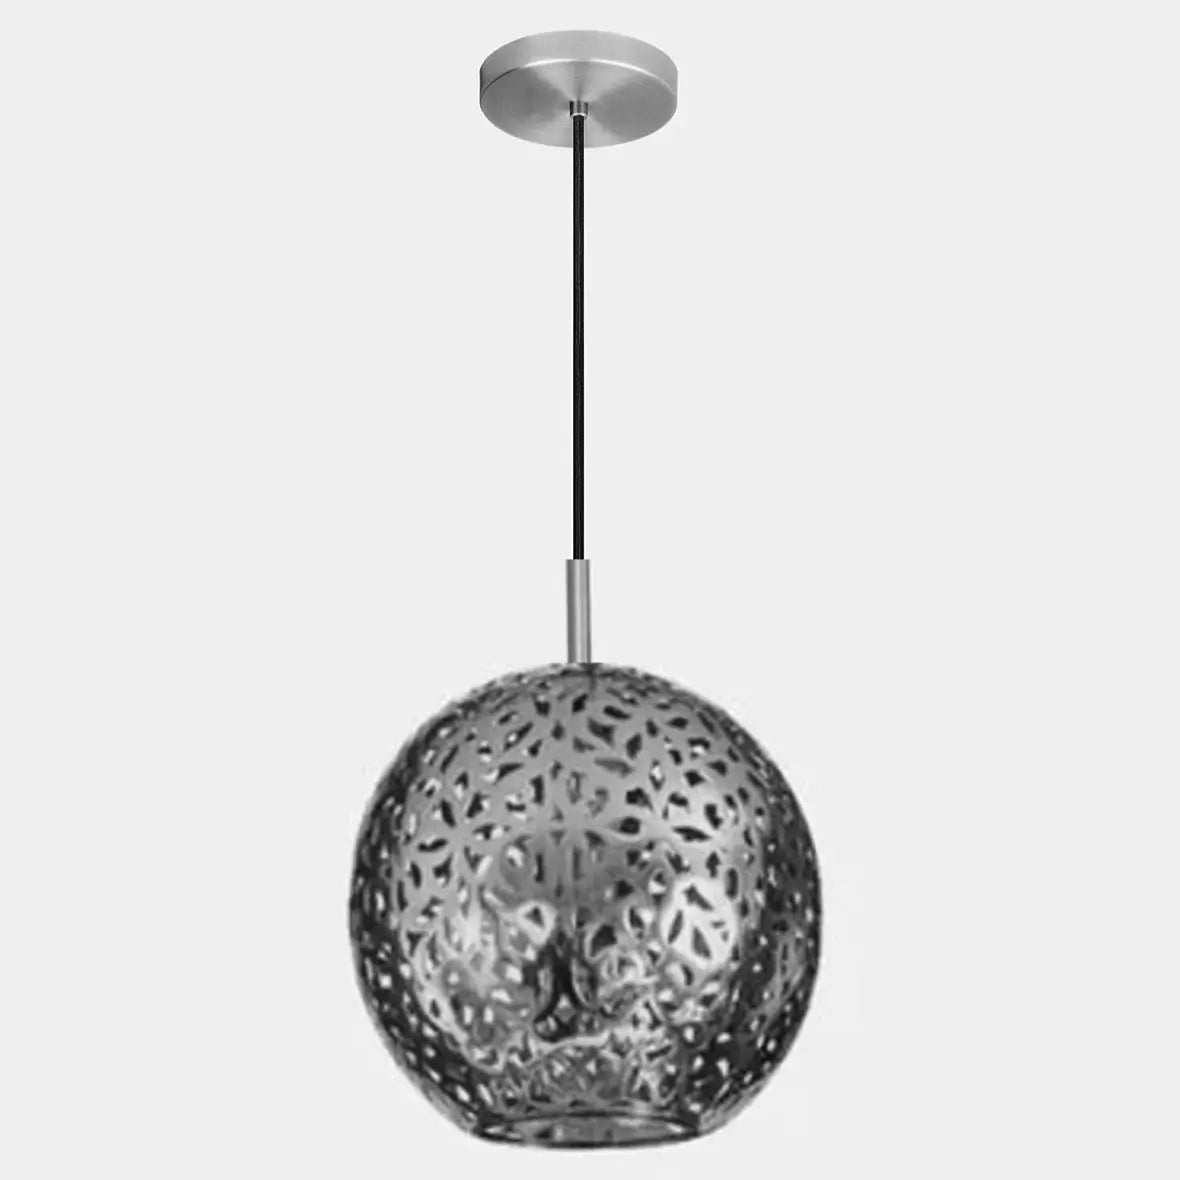 Dounia home Pendant light in nickel silver   made of Metal, Model: Riad  single